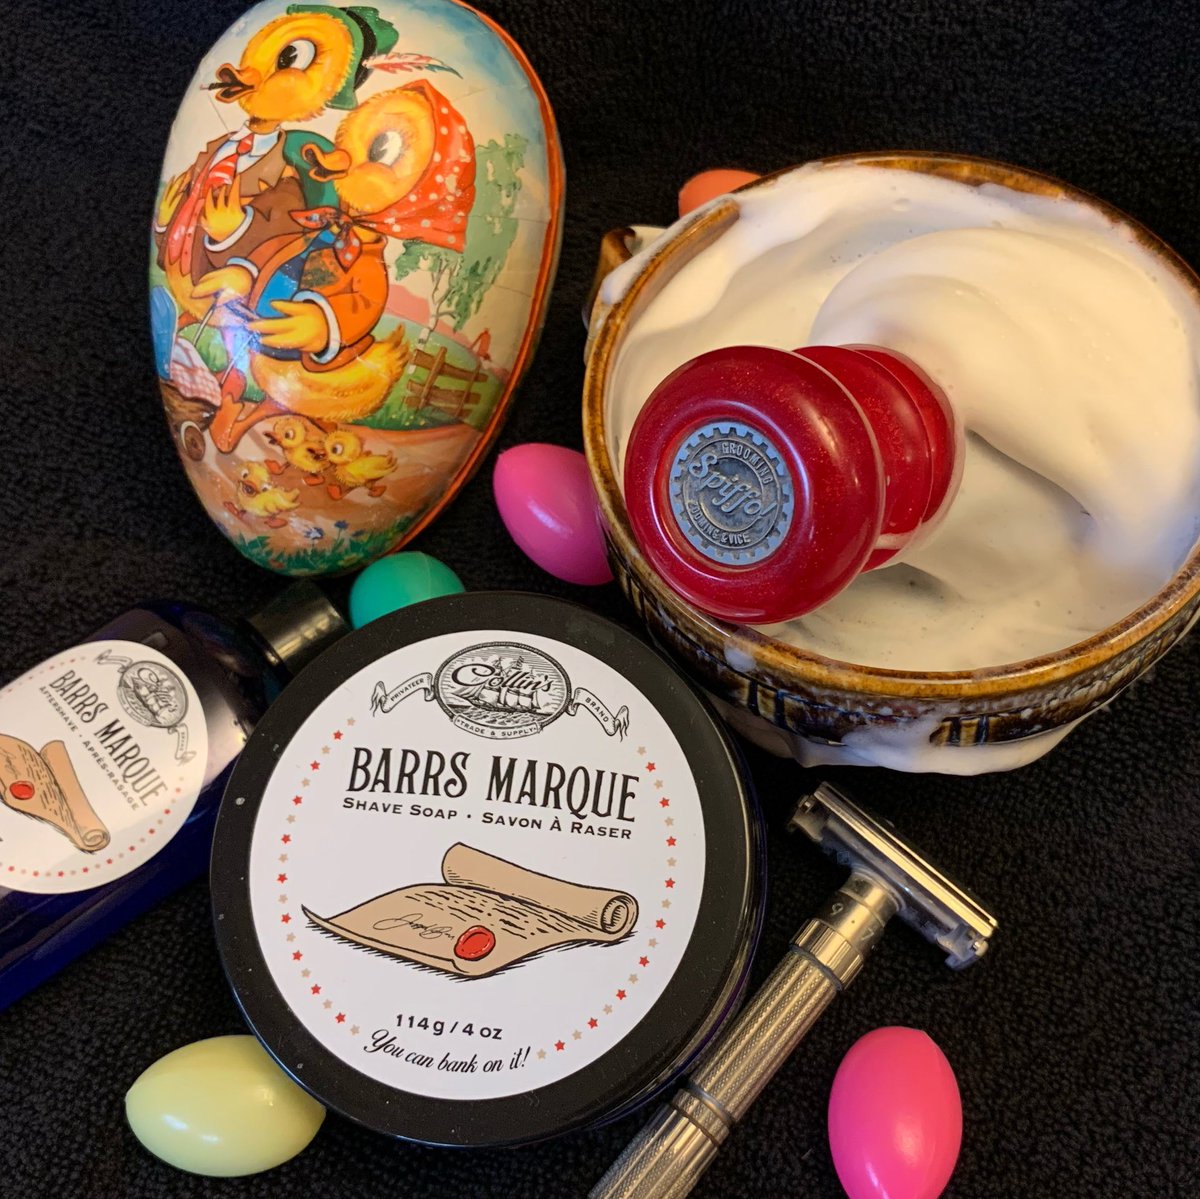 Hope the bunny found you! Happy Easter, all! #spiffo #spiffoman #shaving #wetshaving #wetshaver #shave #shavingculture #shavelikeaboss #sotd #shaveoftheday #shavingsoap #sundayshave #greatshave #cleanshaven #easter #happyeaster #shavesoap #shavingbrush #dailyshave #eastershave